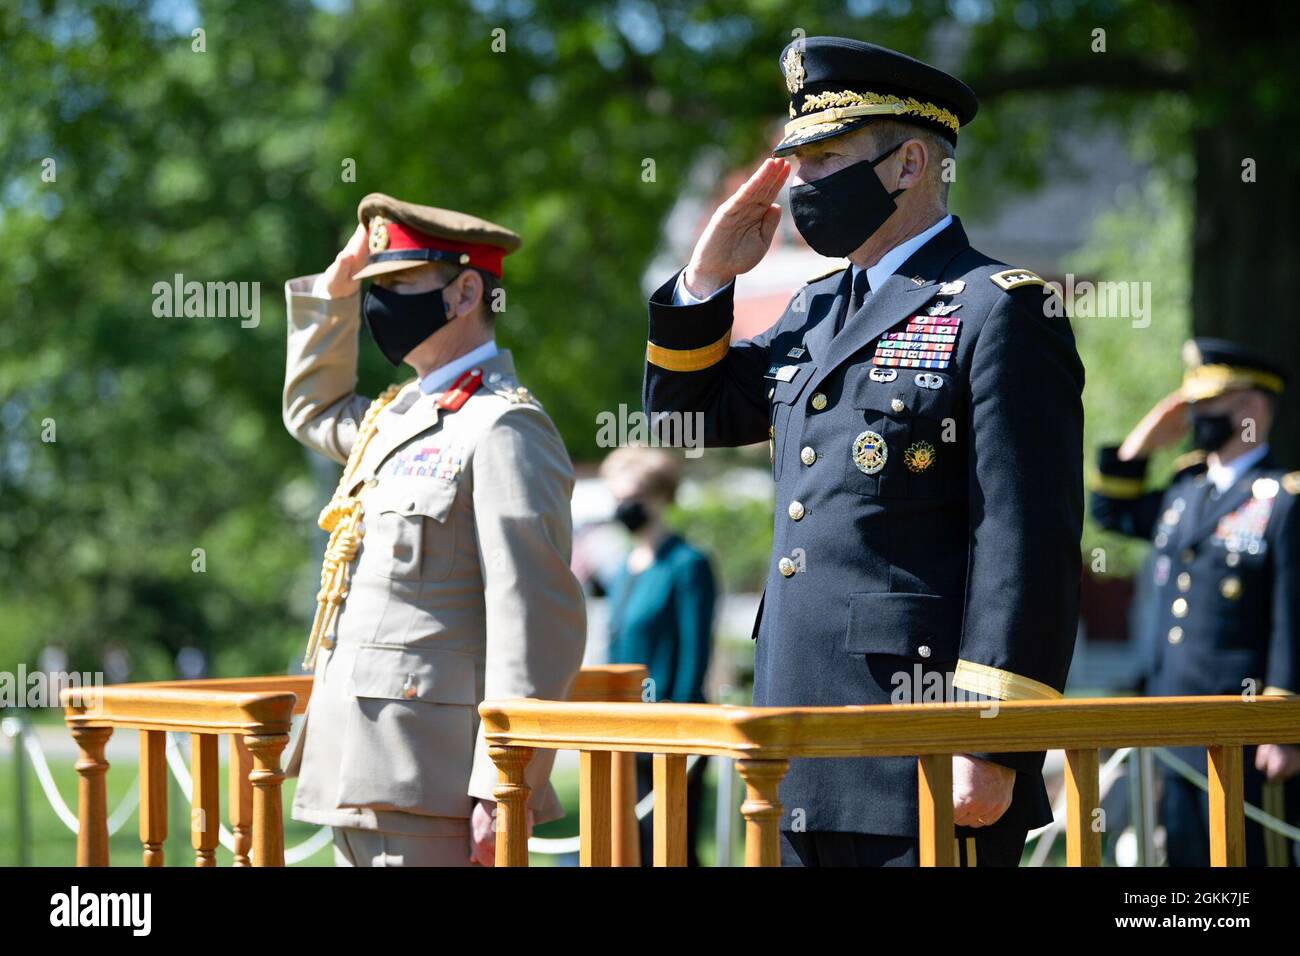 Chief of Staff of the U.S. Army Gen. James C. McConville and General Sir Mark Alexander Carleton-Smith, the chief of the General Staff of the British Army, render honors during an Army Full Honor Arrival Ceremony at Whipple Field, Joint Base Myer-Henderson Hall, Arlington, Va., May 13, 2021. Stock Photo